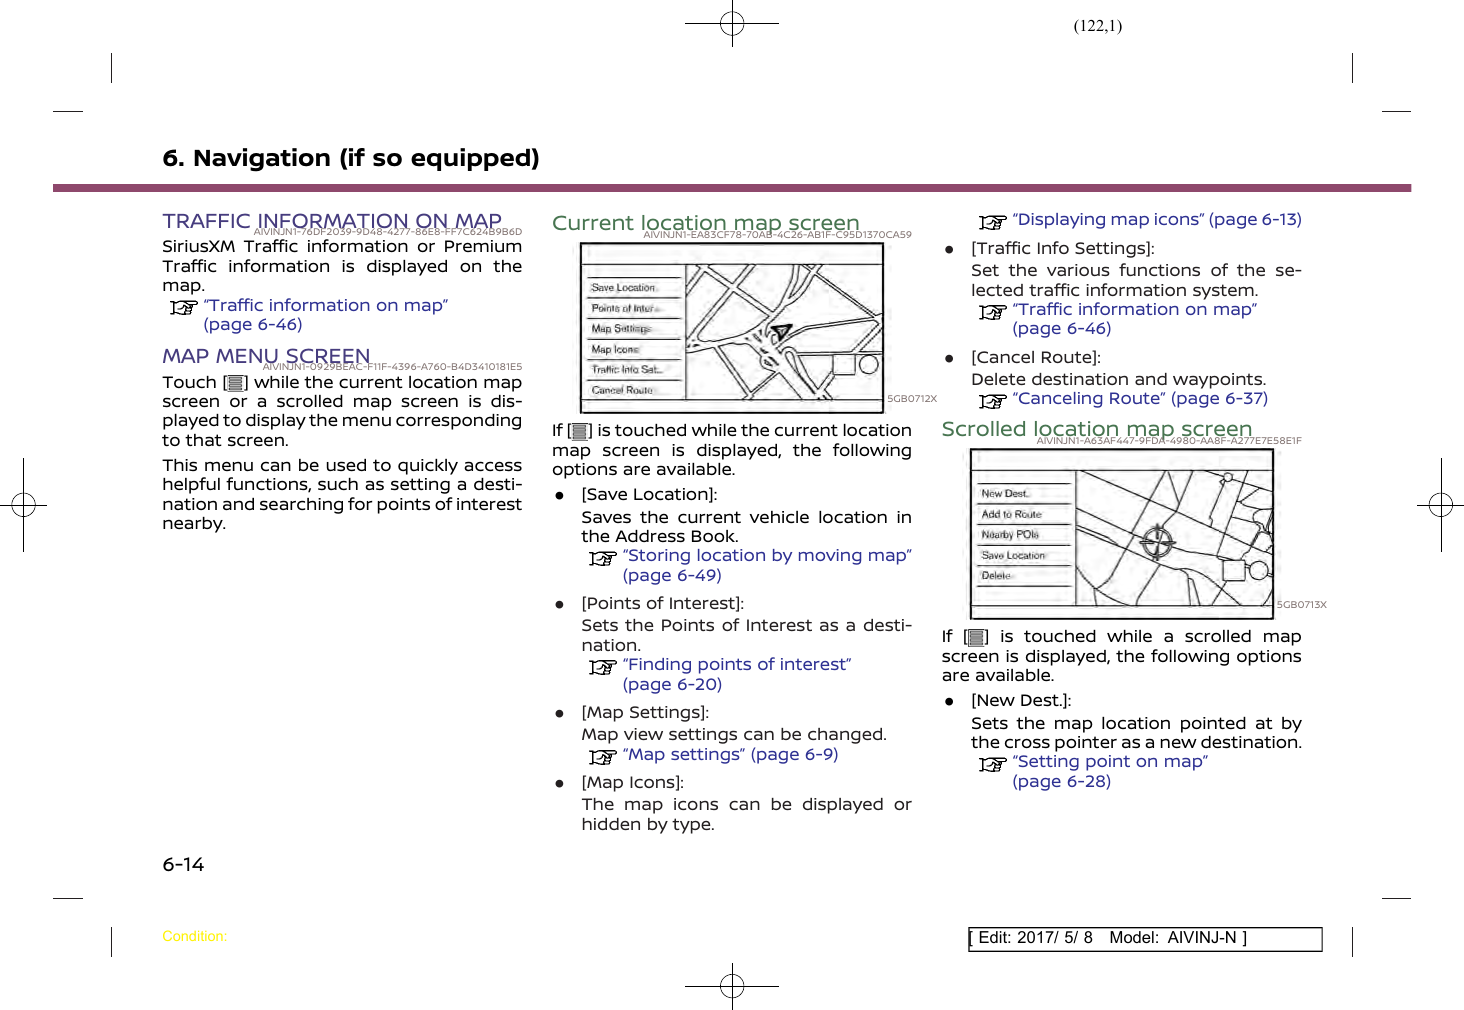 Page 122 of Robert Bosch Car Multimedia AIVICMFB0 Navigation System with Bluetooth and WLAN User Manual